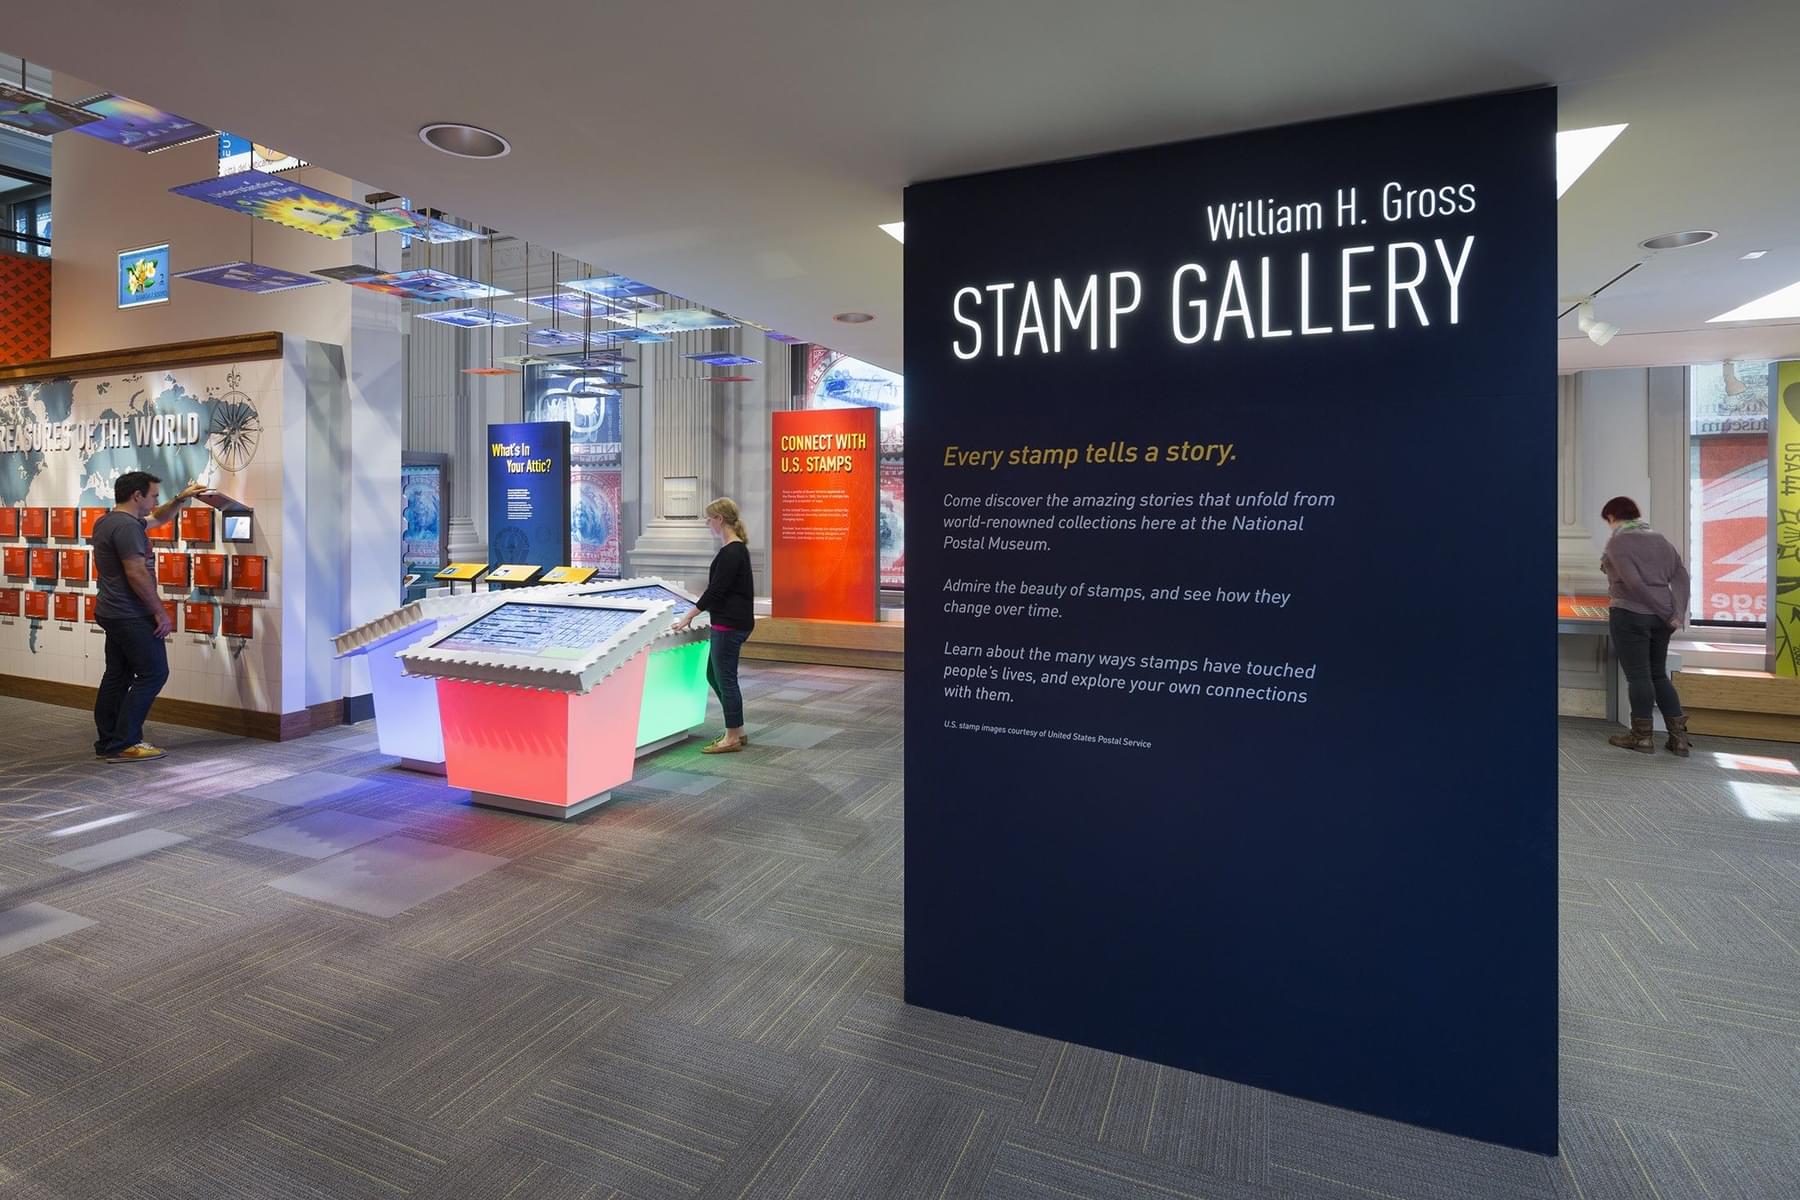 Step inside the Stamp Gallery to look at the old postal stamps